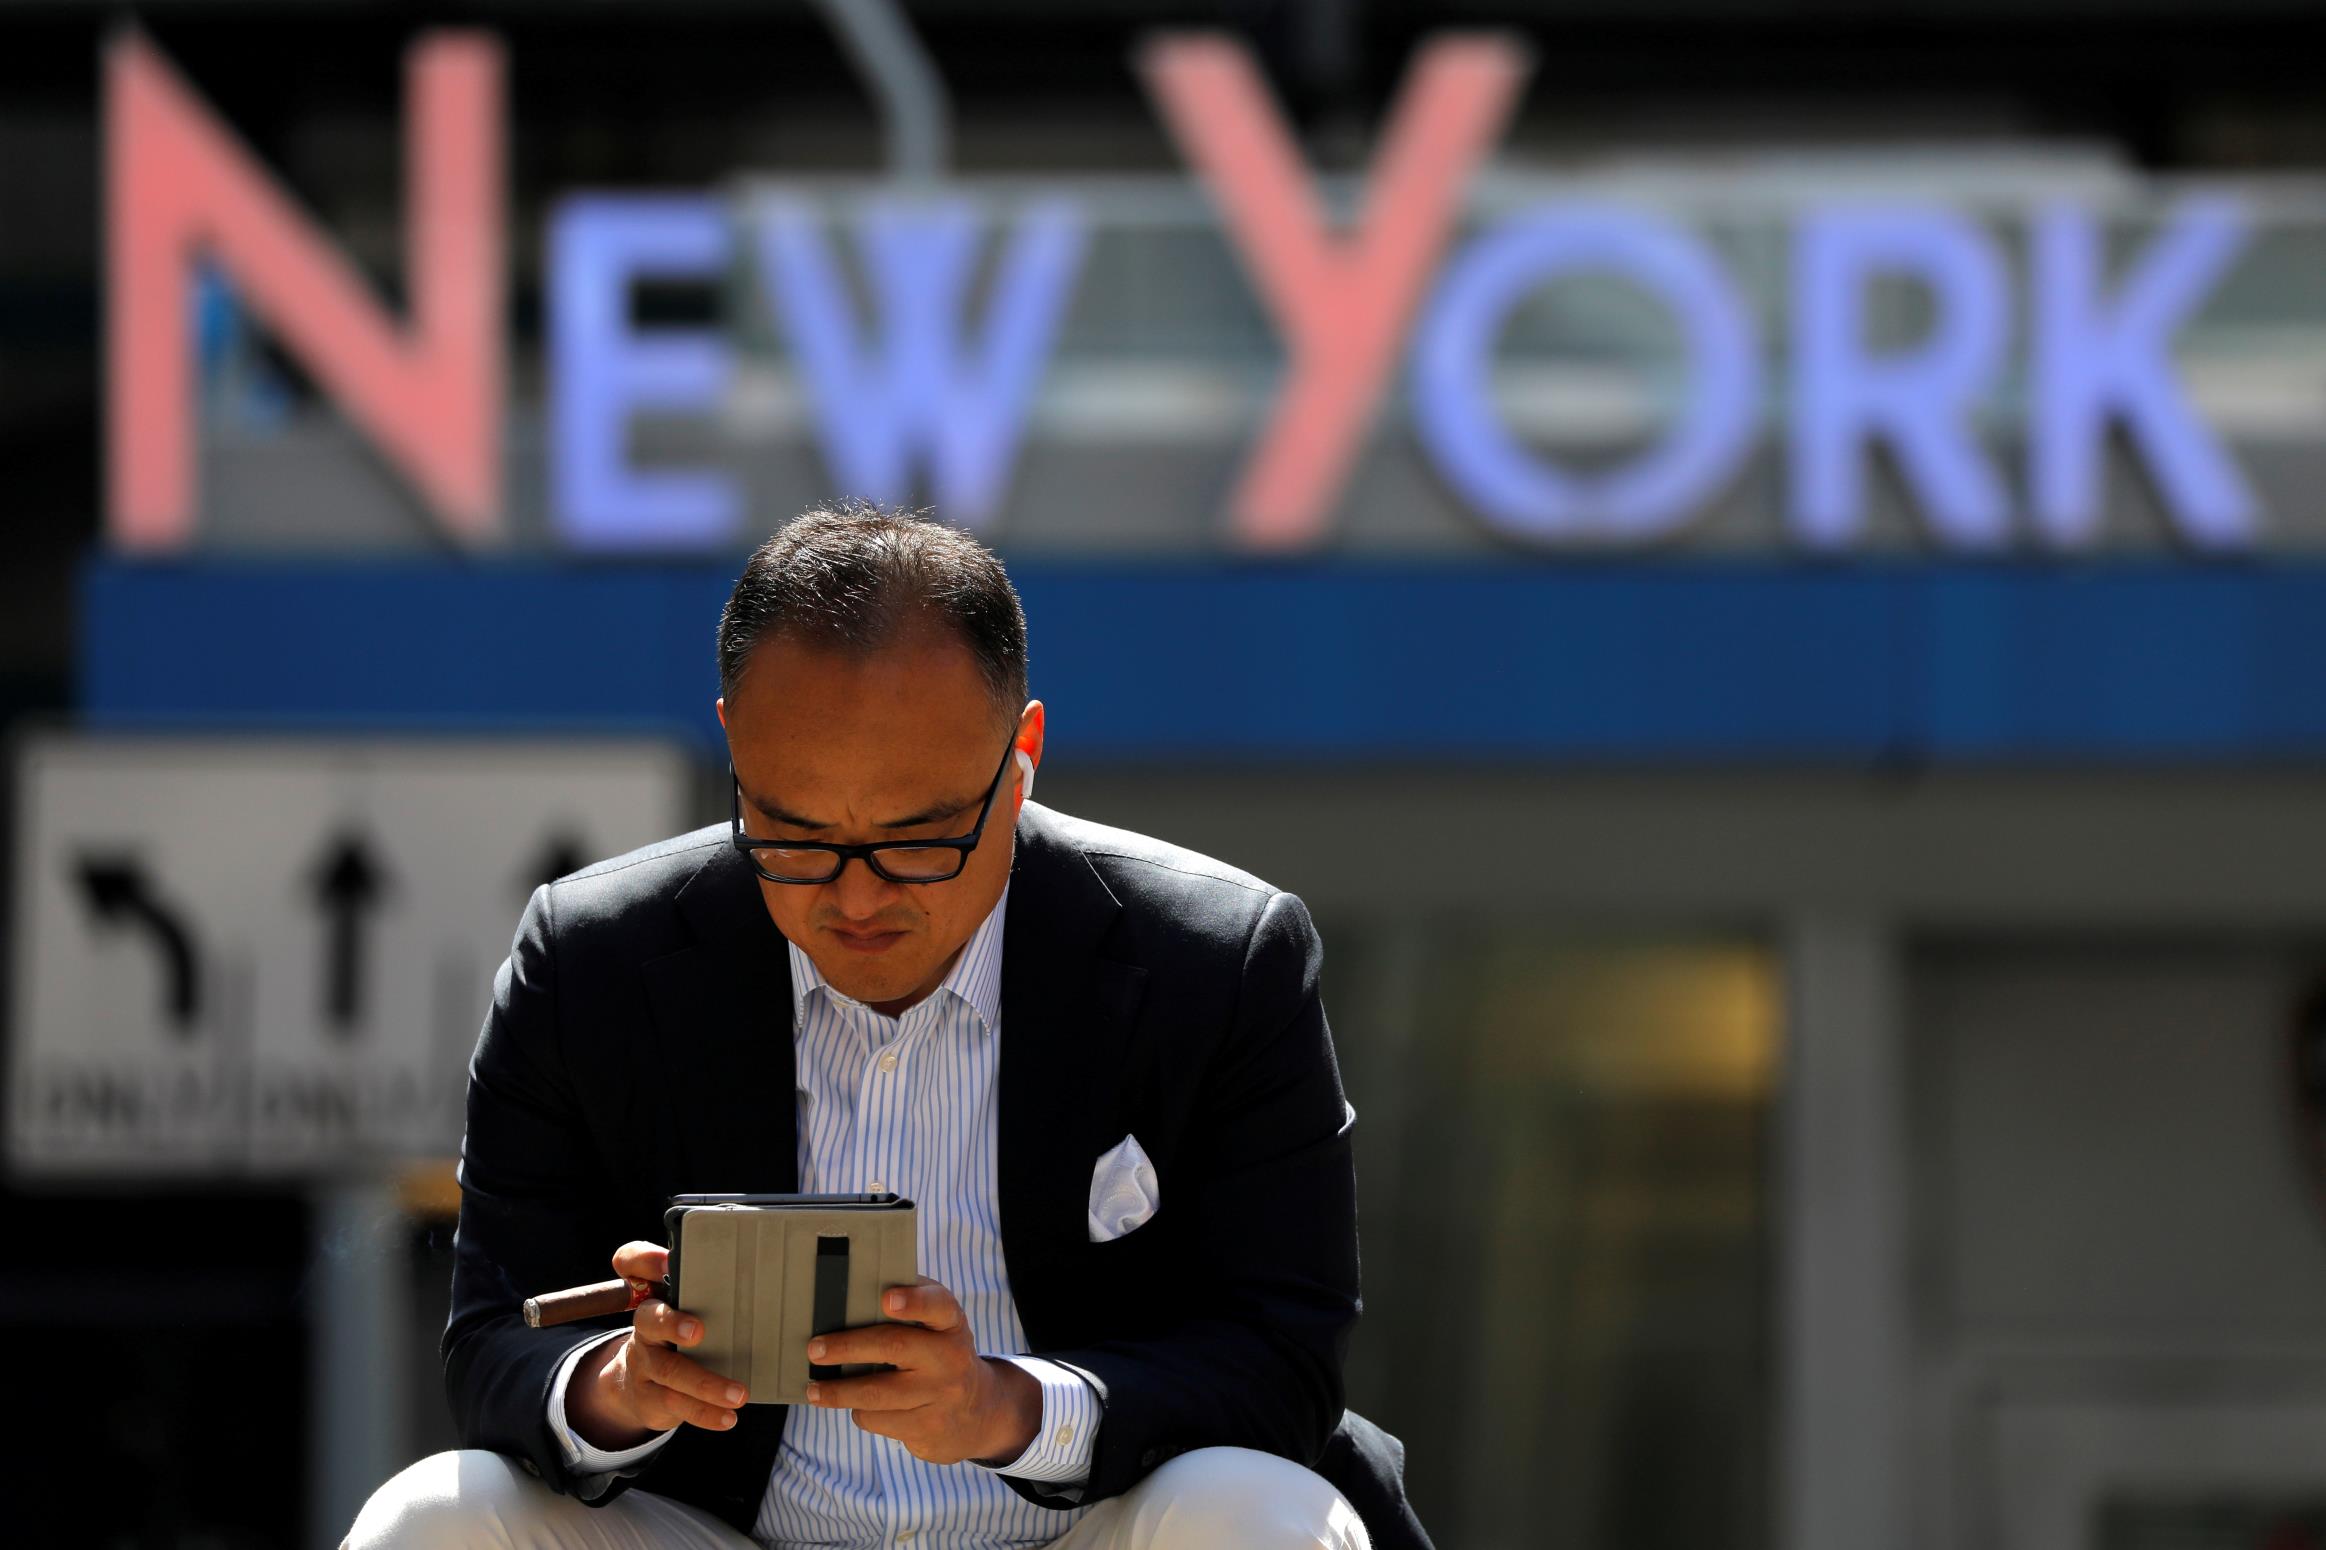 A person sits in Times Square after the Centers for Disease Co<em></em>ntrol and Prevention (CDC) announced new guidelines regarding outdoor mask wearing and vaccination during the outbreak of the coro<em></em>navirus disease (COVID-19) in Manhattan, New York City, New York, U.S., April 27, 2021. REUTERS/Andrew Kelly